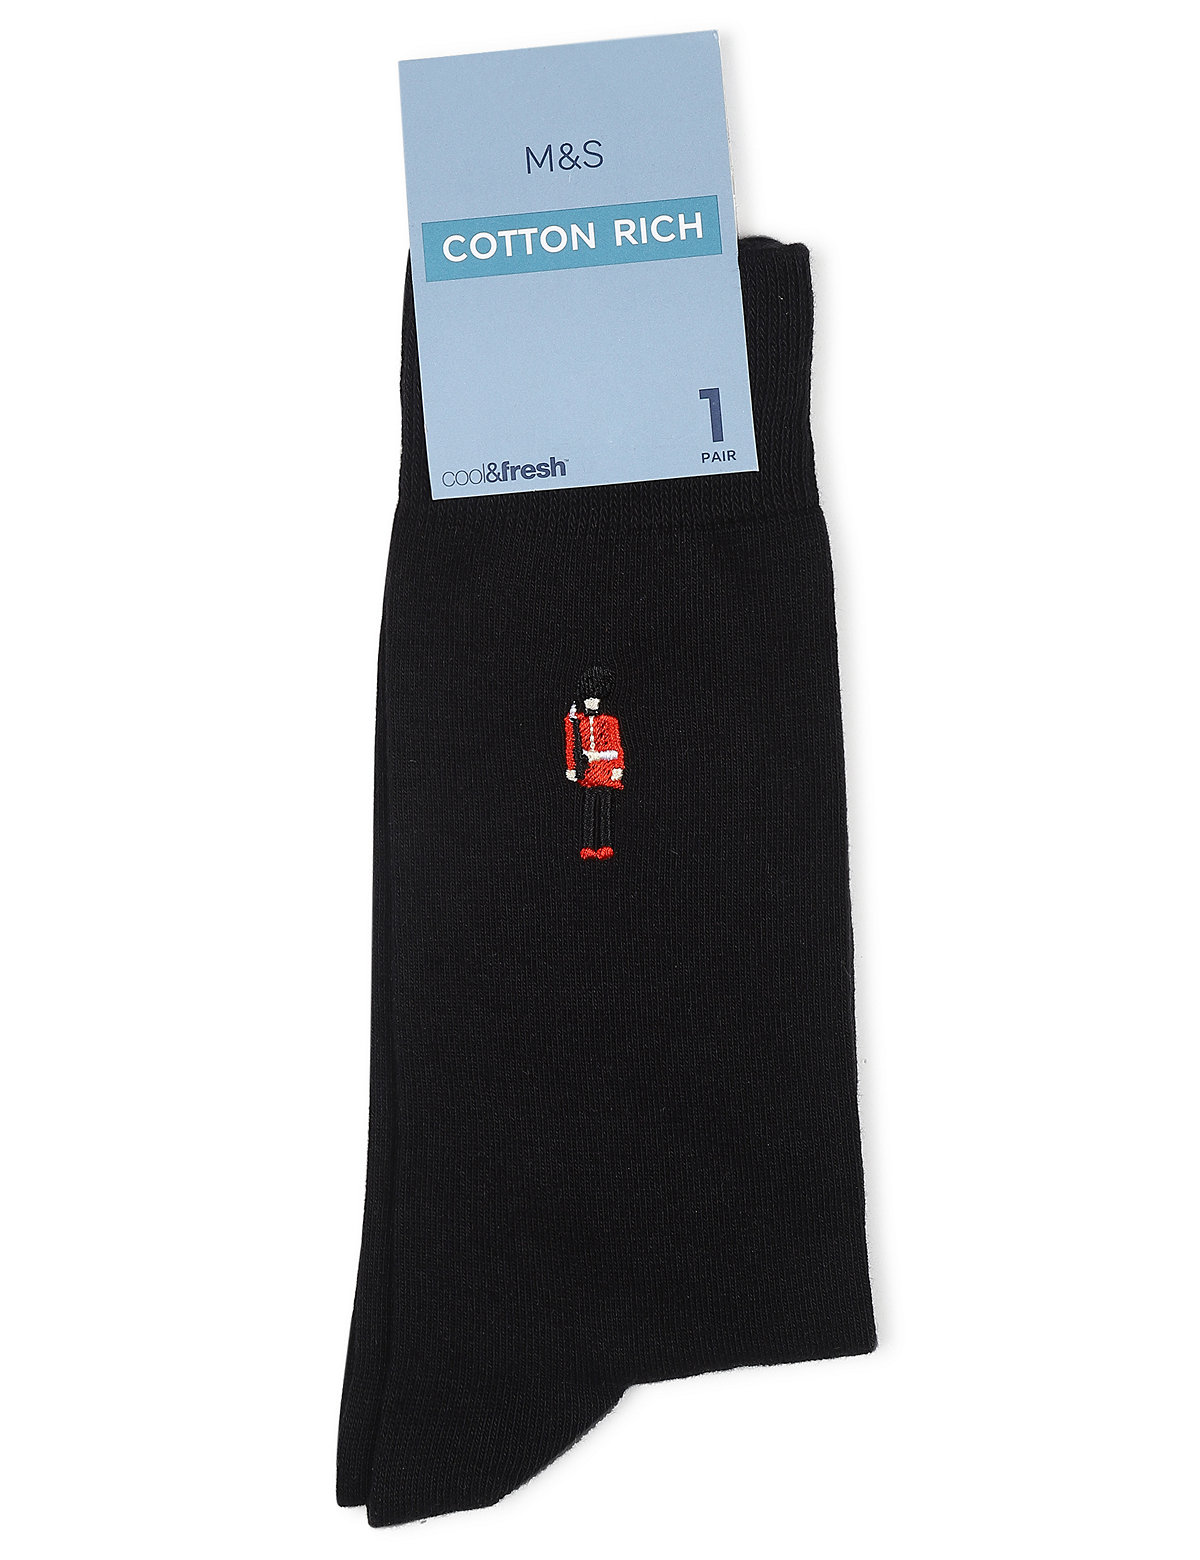 Pair of Cotton Mix Embroidered Socks